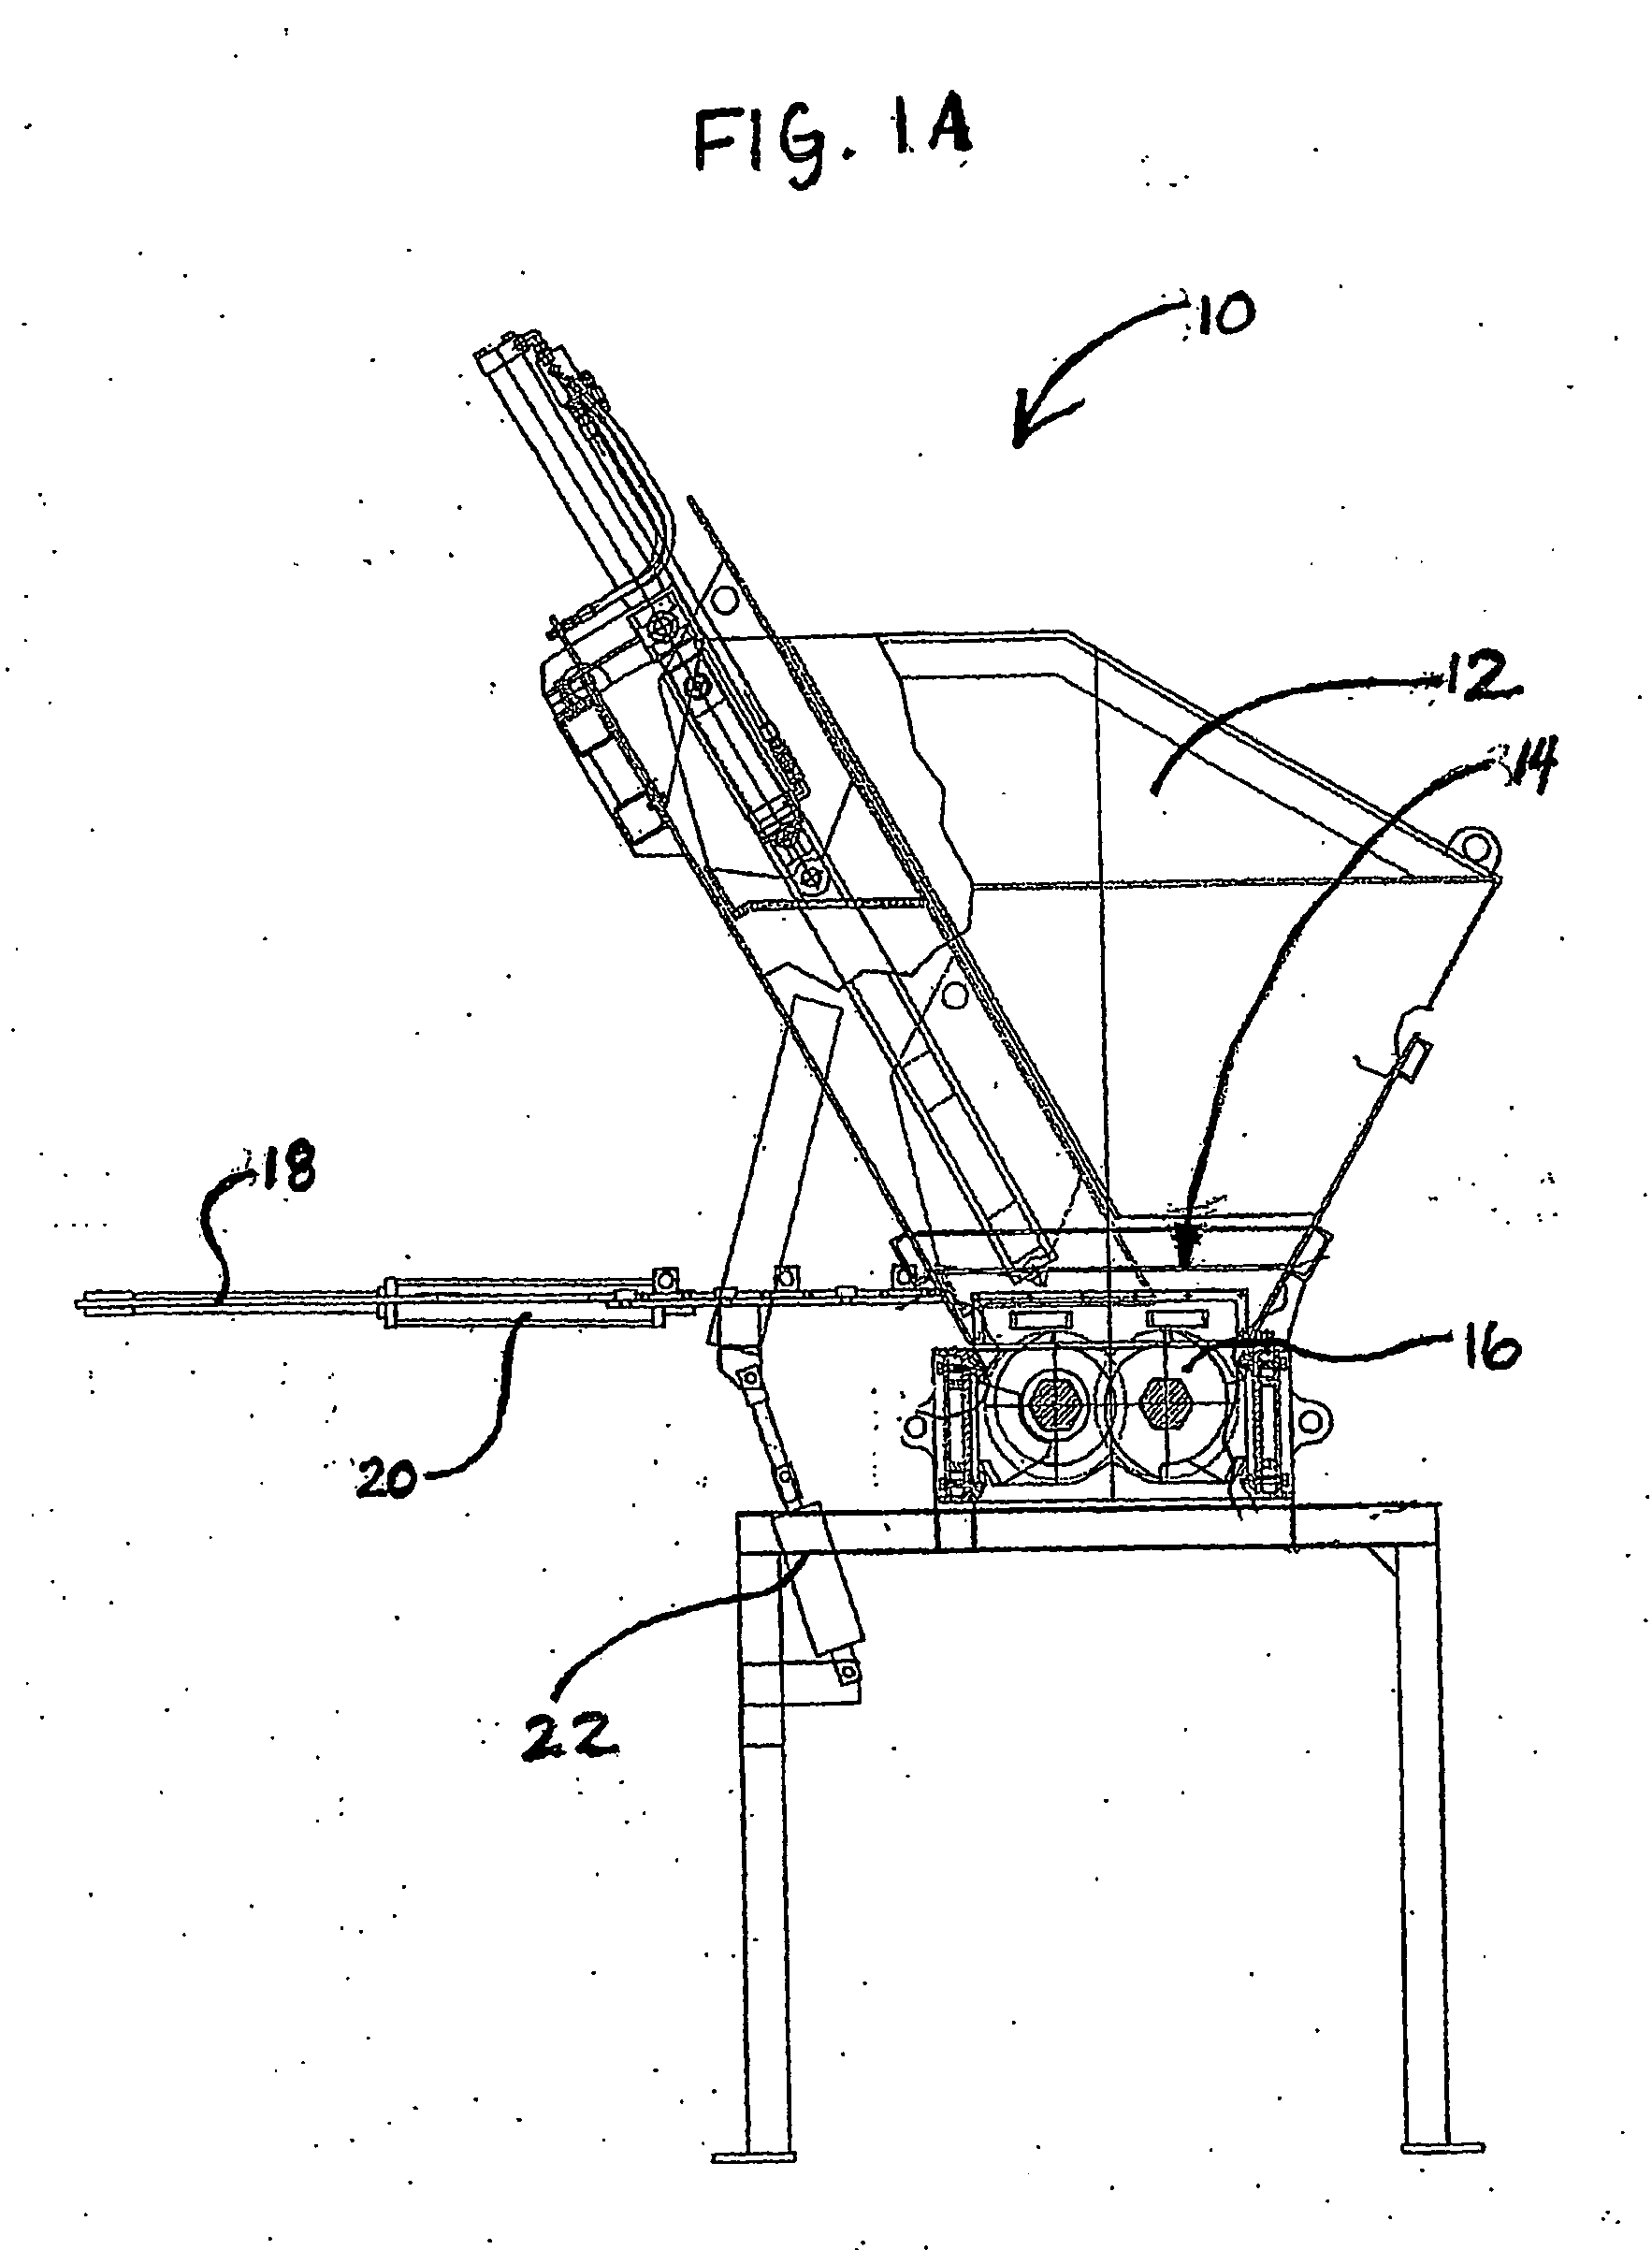 Apparatus and method for transforming solid waste into useful products